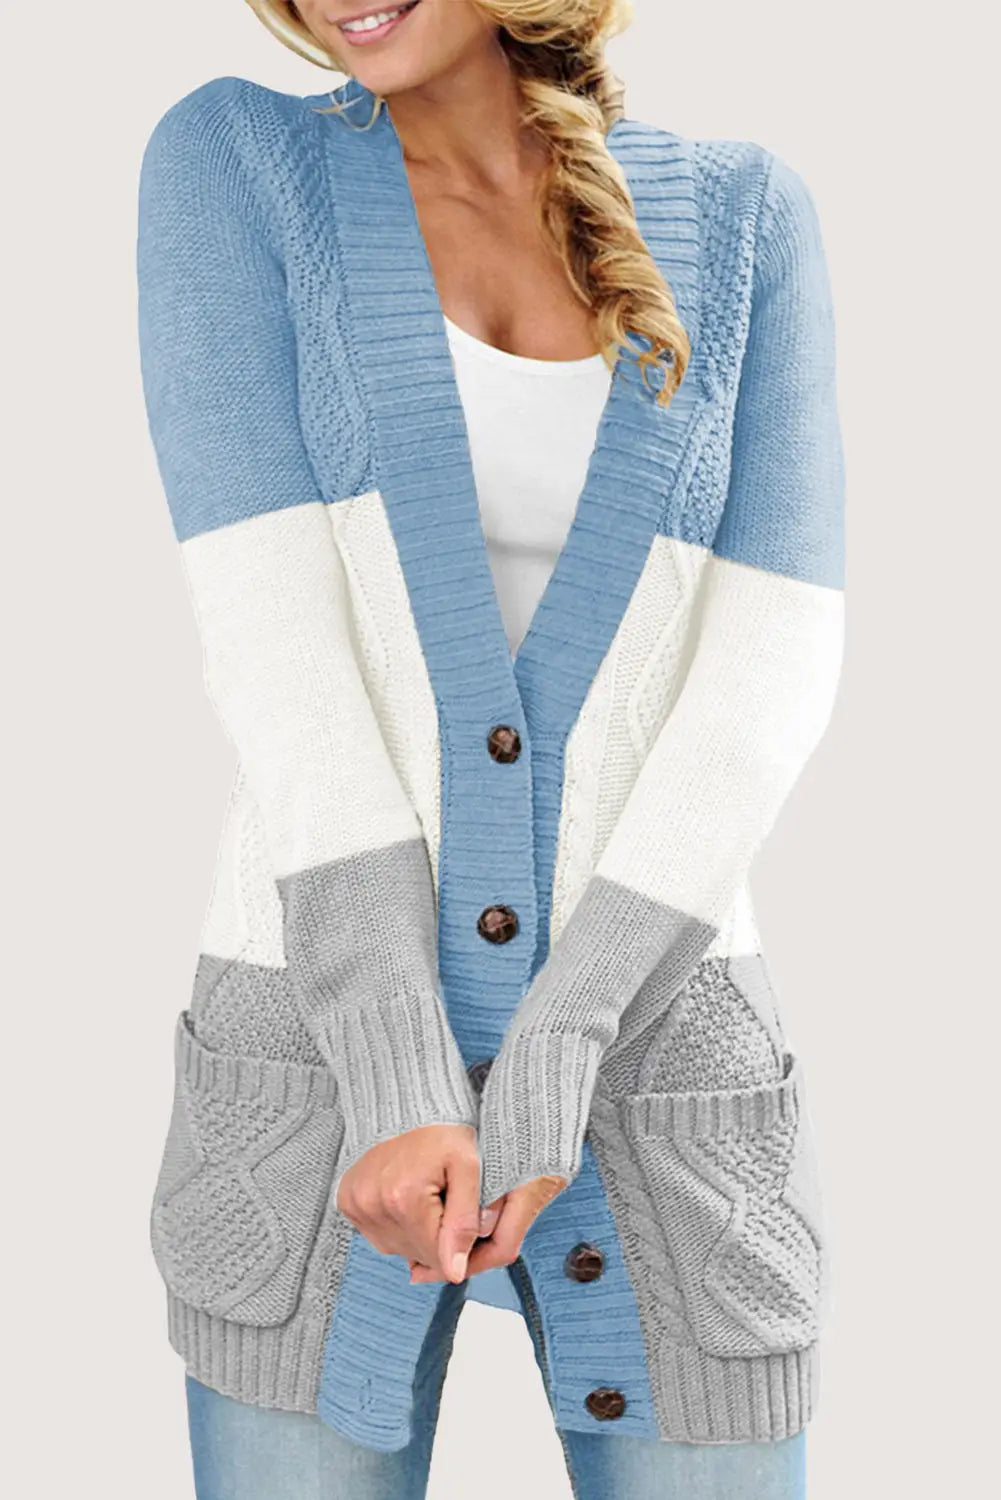 Blue front pocket and buttons closure cardigan - l / 100% acrylic - sweaters & cardigans